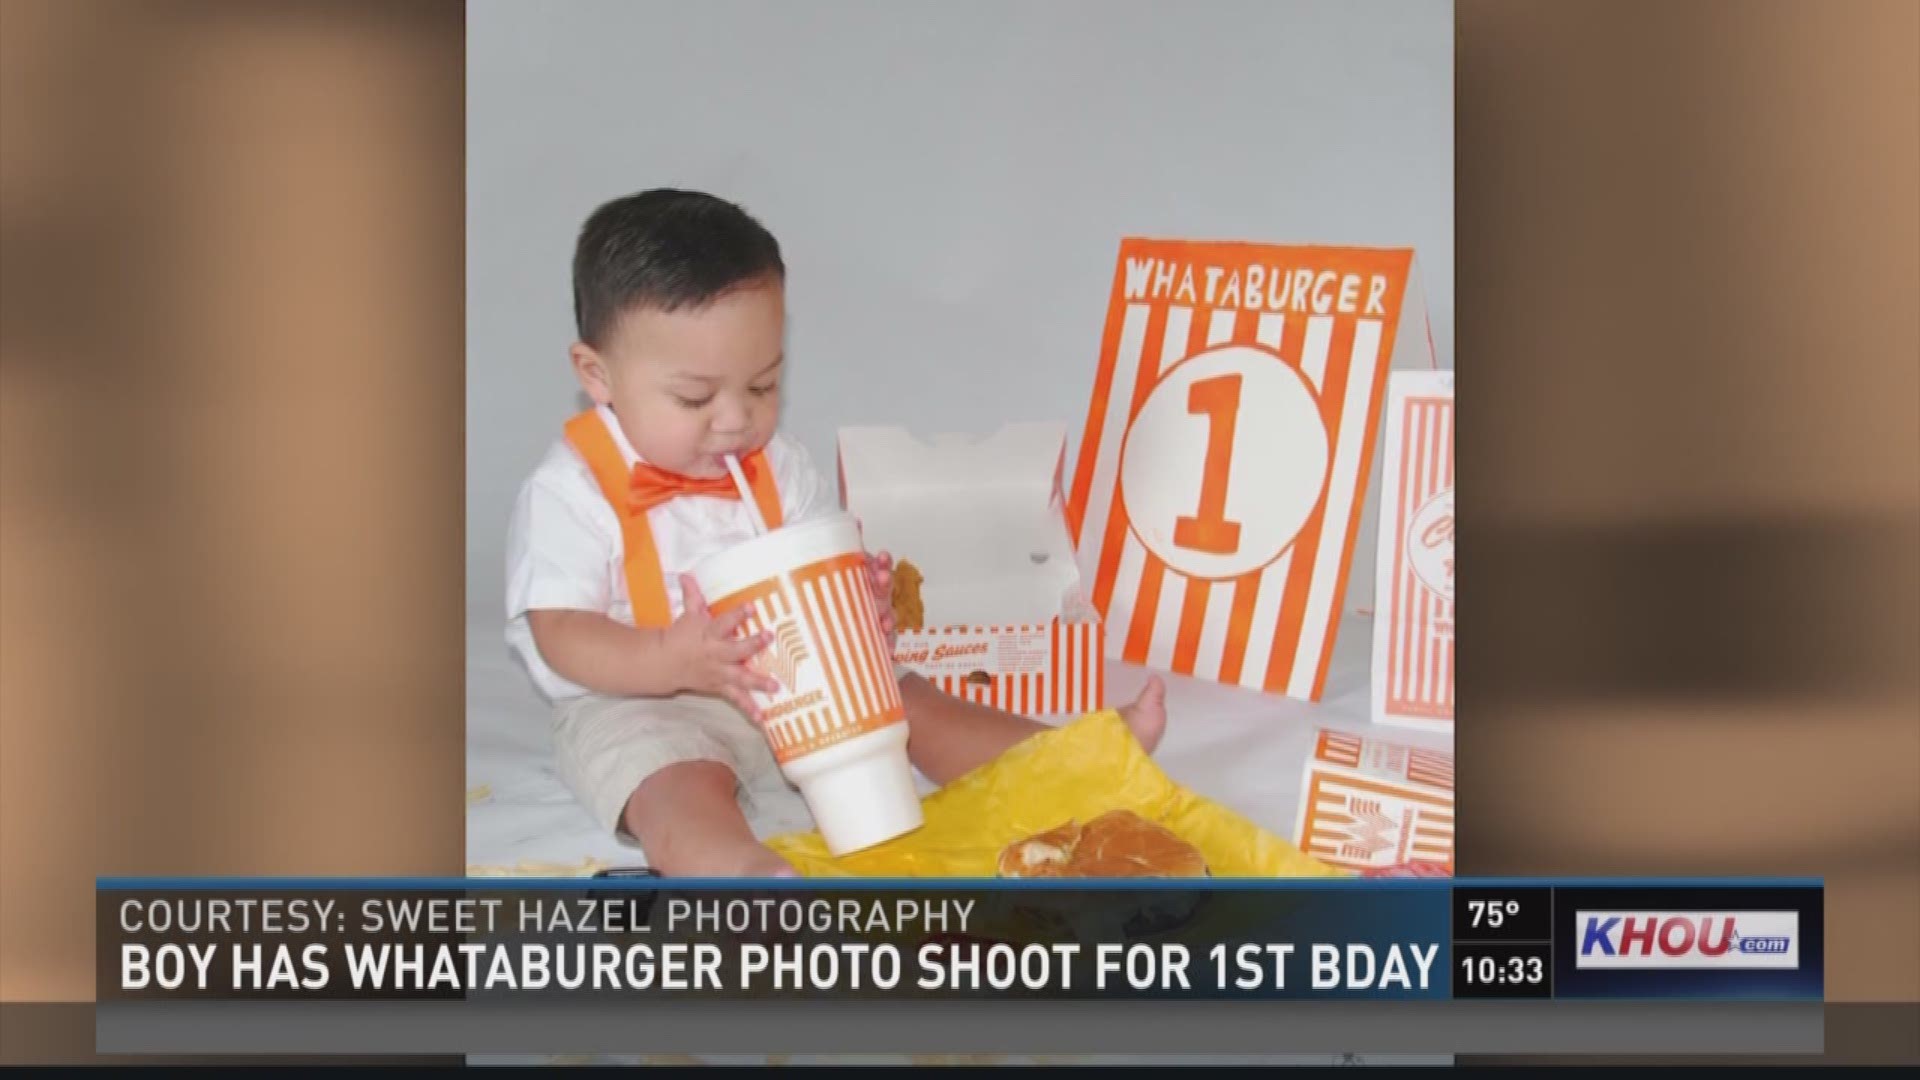 When it comes to birthdays, forget the cake! For one little Houstonian, it's all about Whataburger.